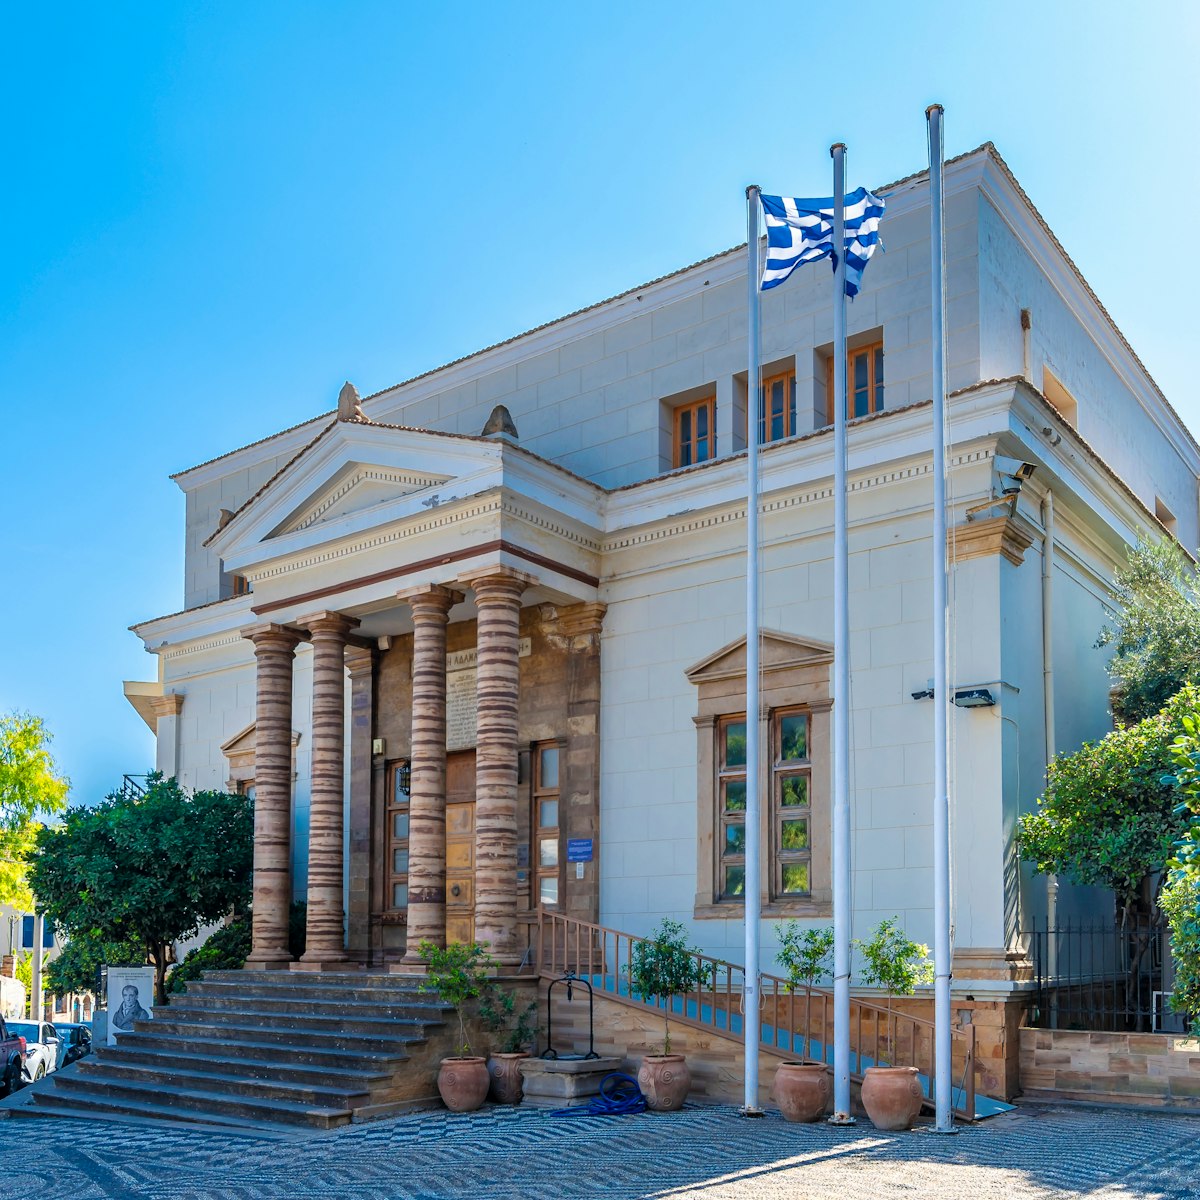 Chios Island, Greece - September 03, 2019 : Koraes central public library view in Chios Island of Greece.; Shutterstock ID 1495179110; your: Erin Lenczycki; gl: 65050; netsuite: Digital; full: POI
1495179110